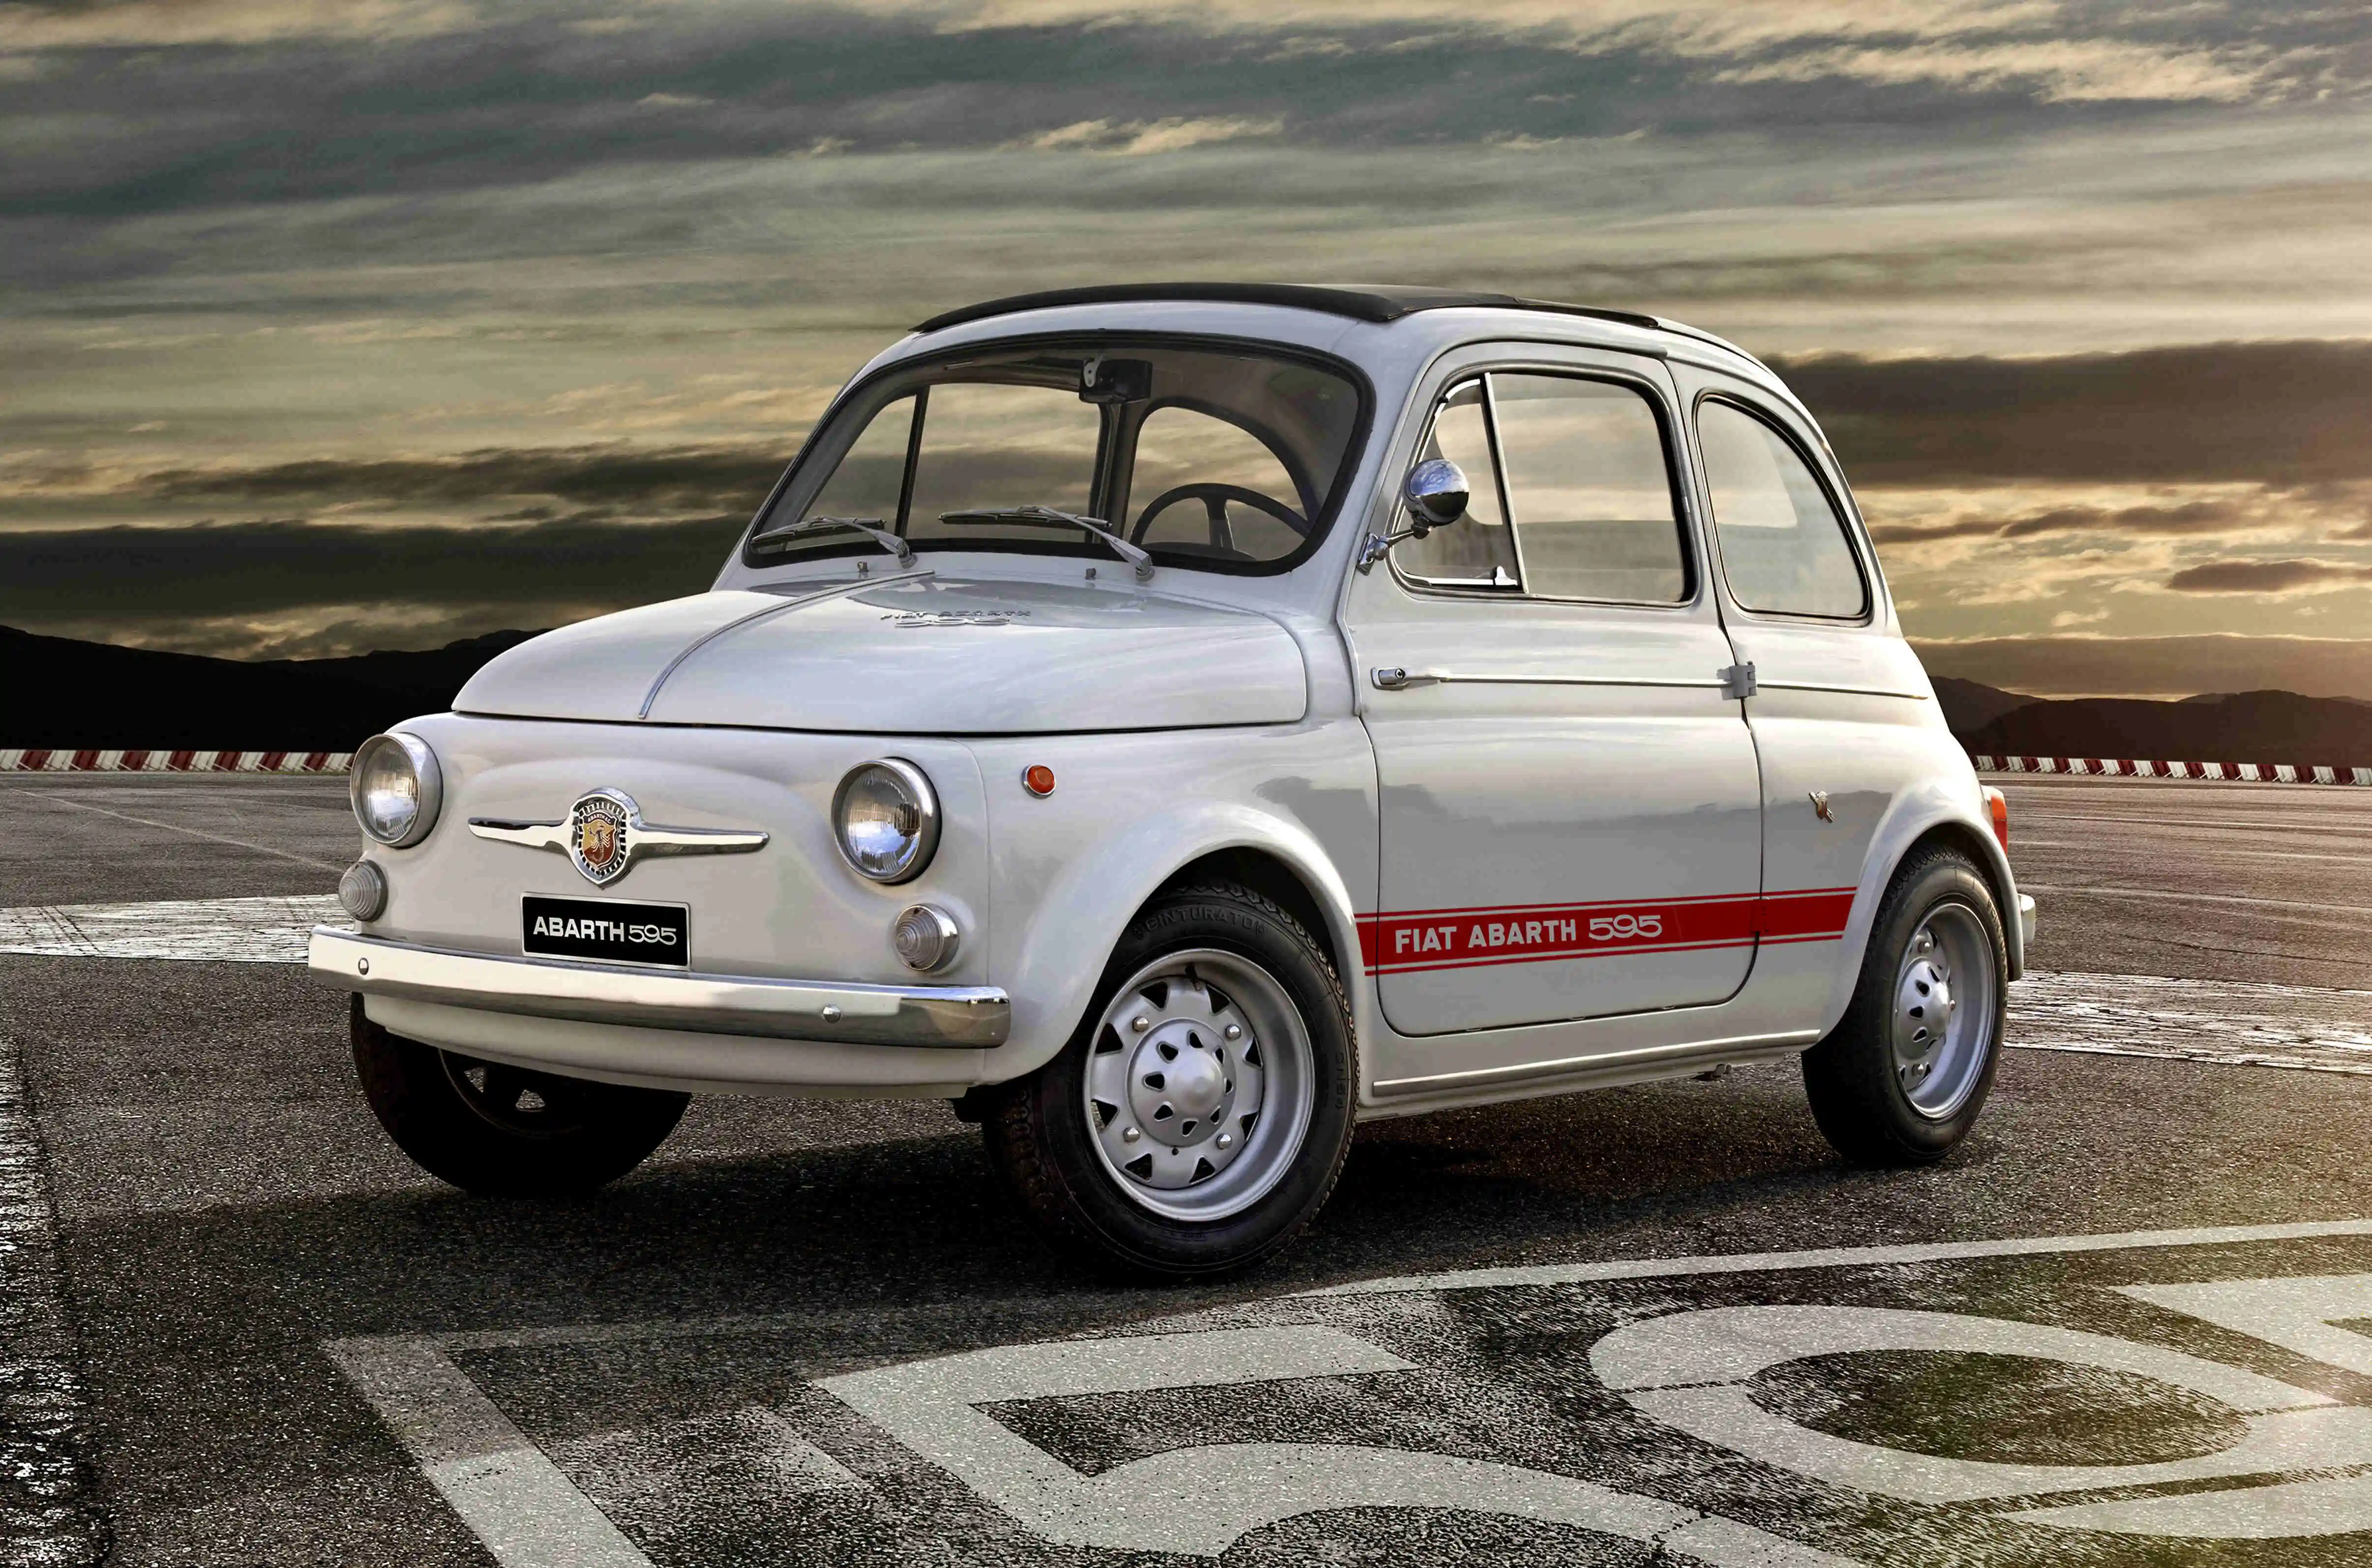 Abarth 595. The little pest image